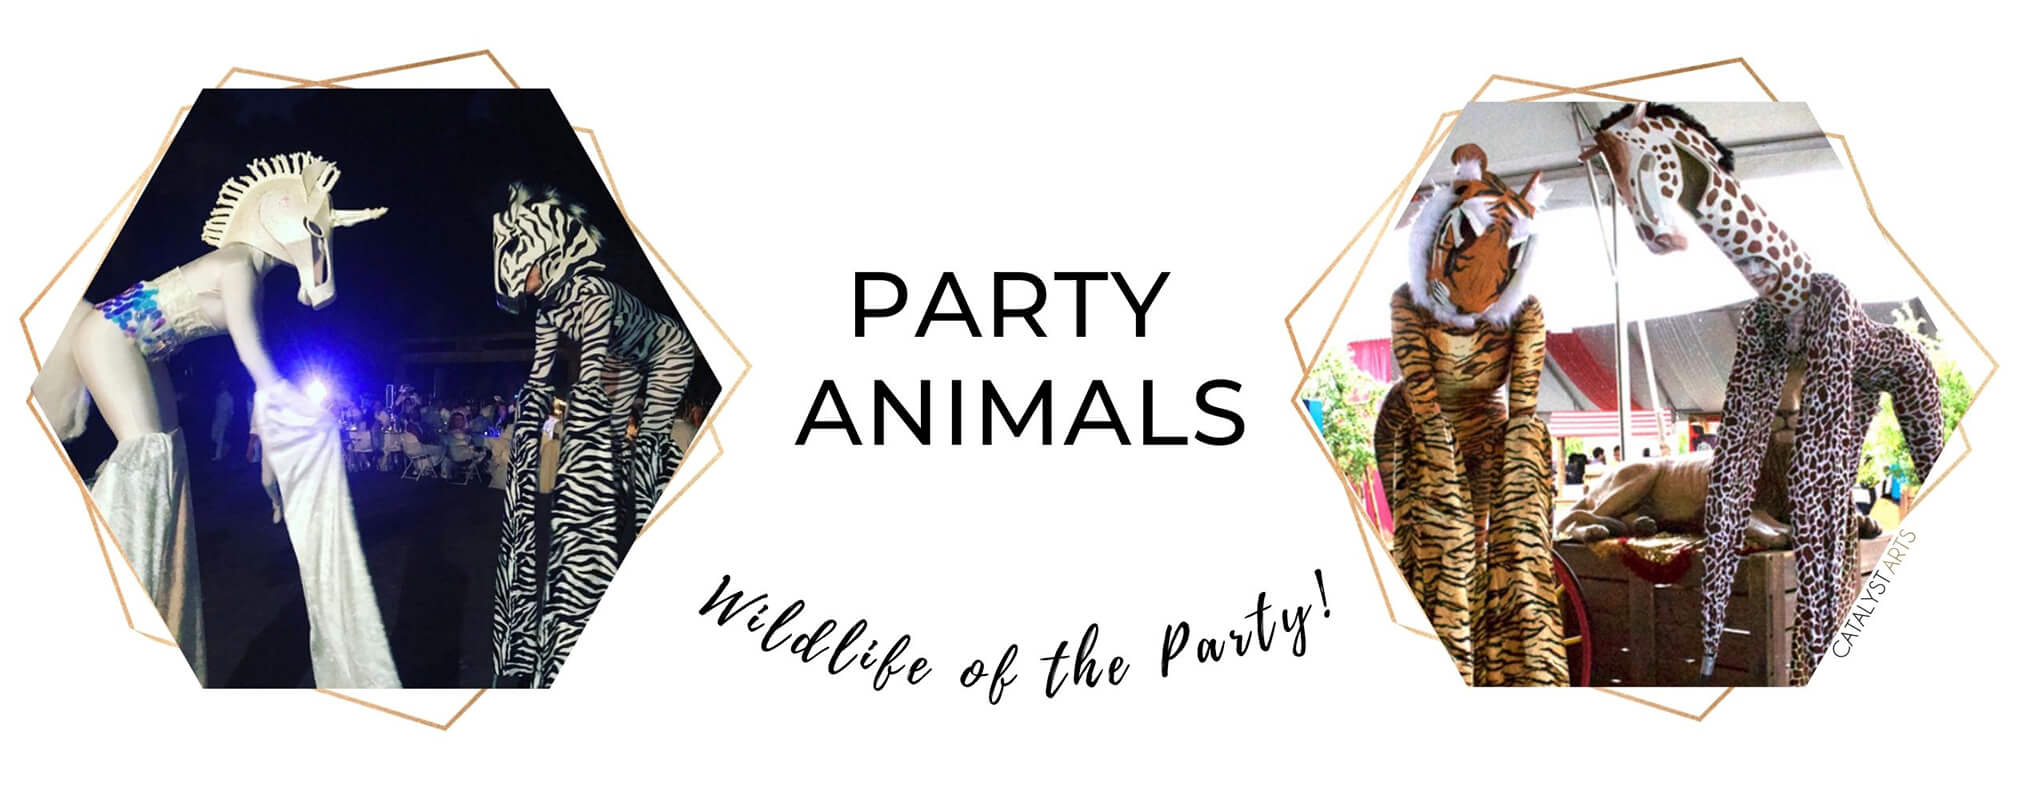 Party Animals + Animal Stilt Walkers in SF by Catalyst Arts